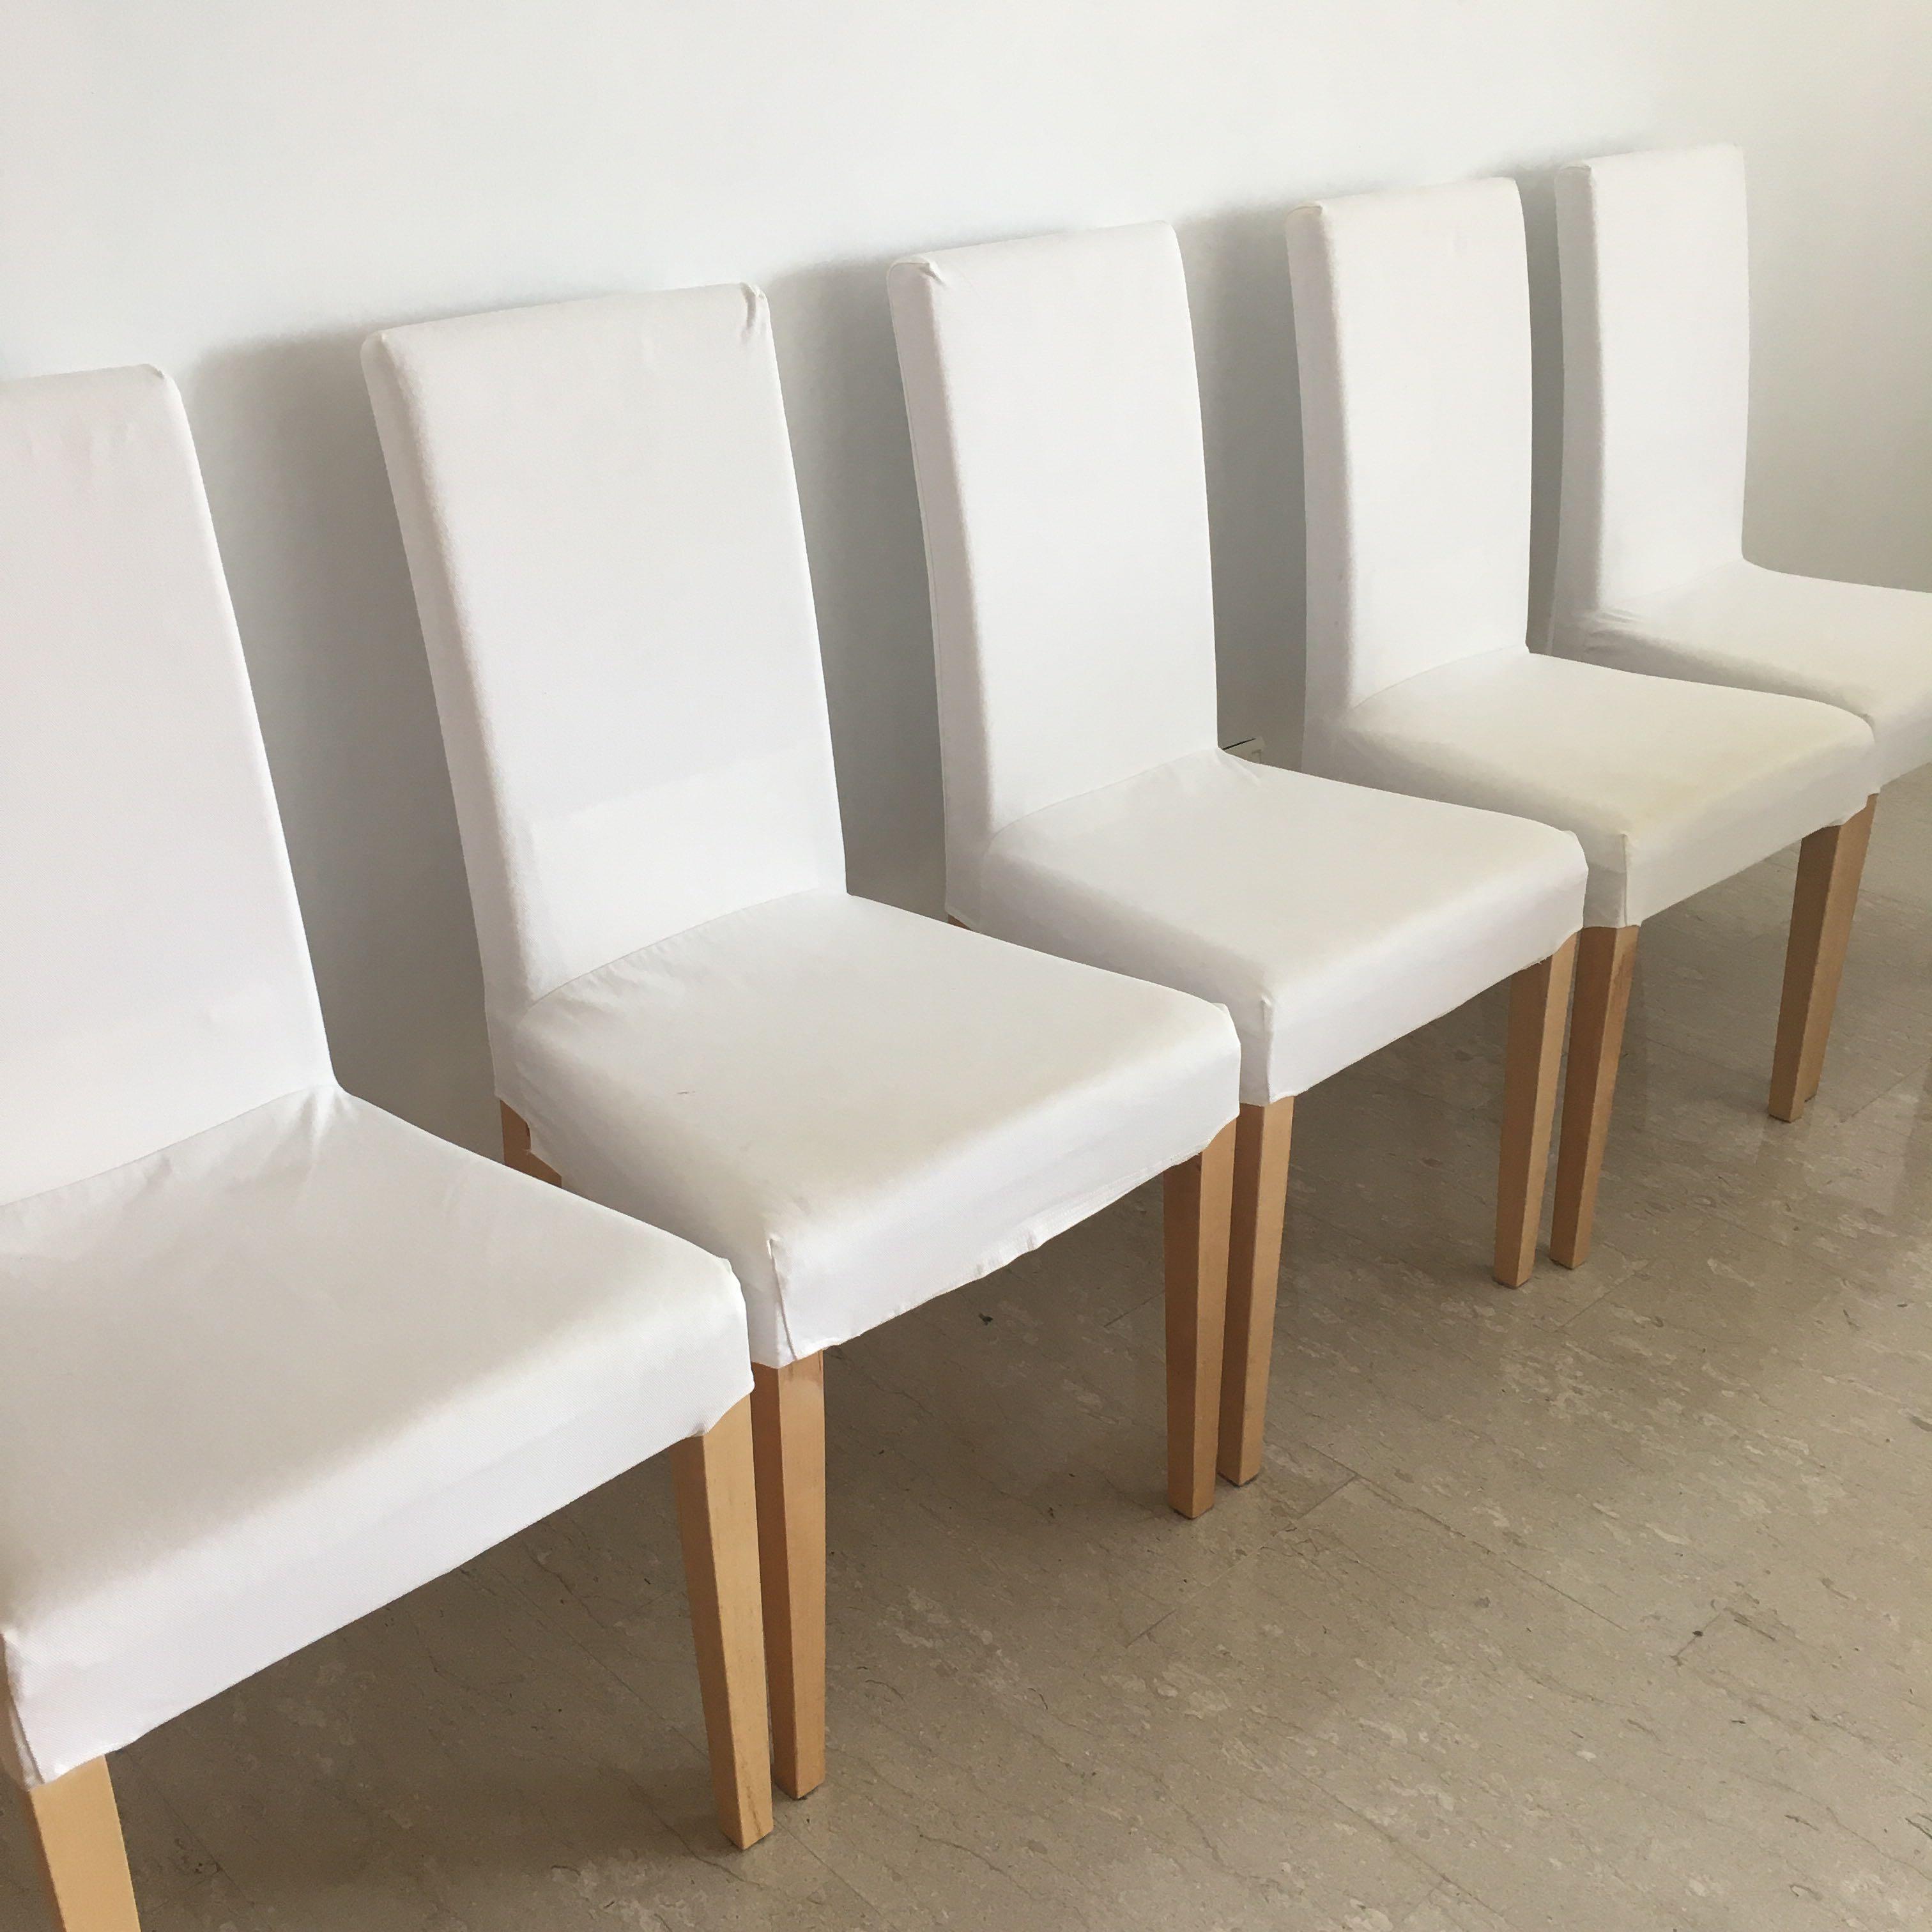 Dining Chair - Ikea HARRY Chair, birch/Blekinge white, Furniture Home Living, Furniture, Chairs on Carousell